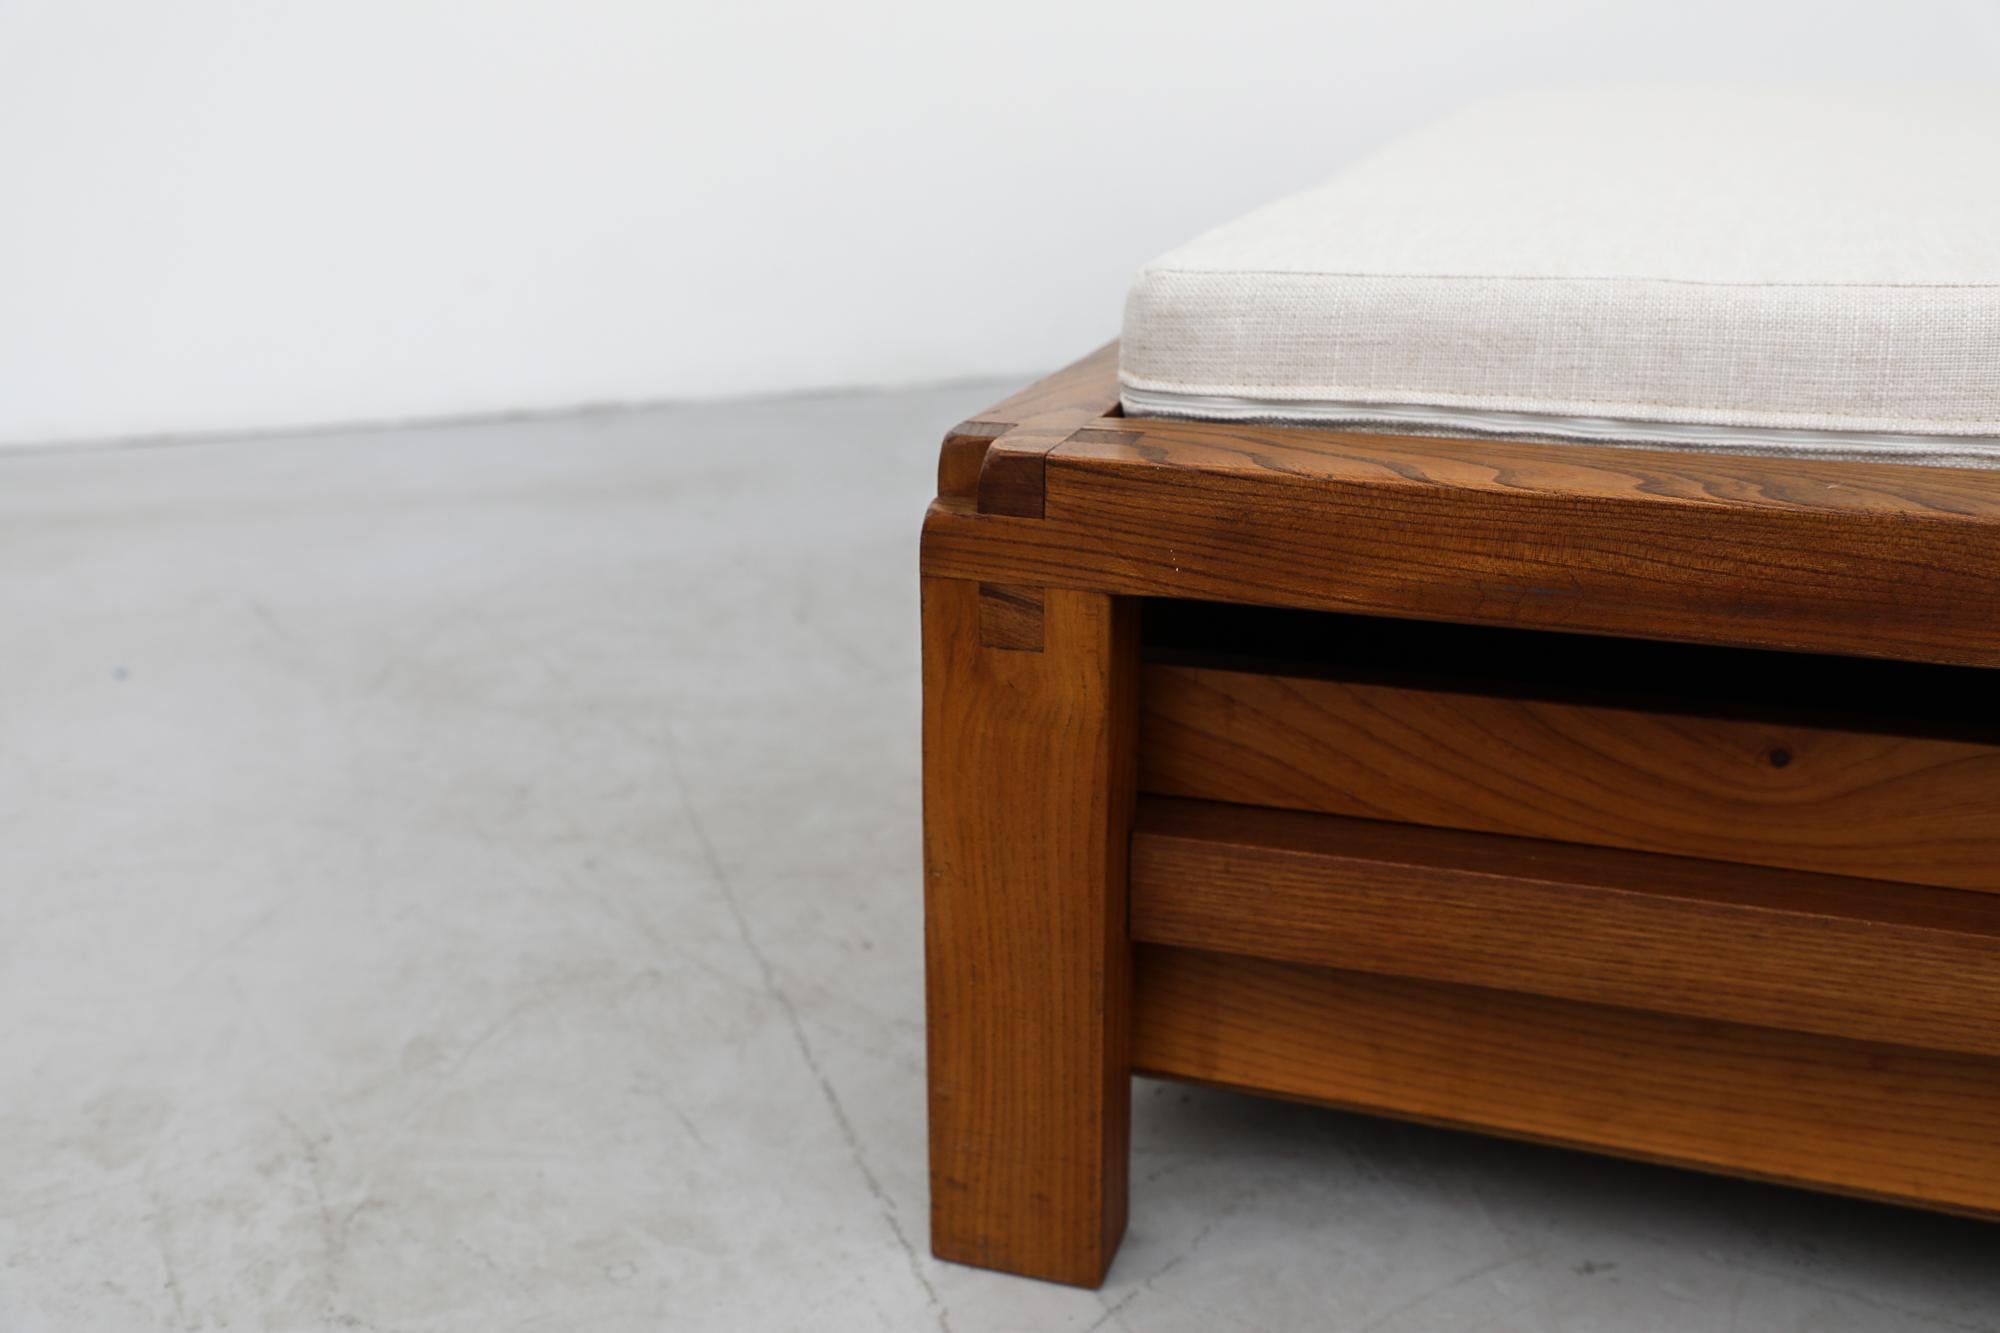 Pierre Chapo 'L03' Daybed in Elm with Storage & Newly Made Mattress, 1960s For Sale 9